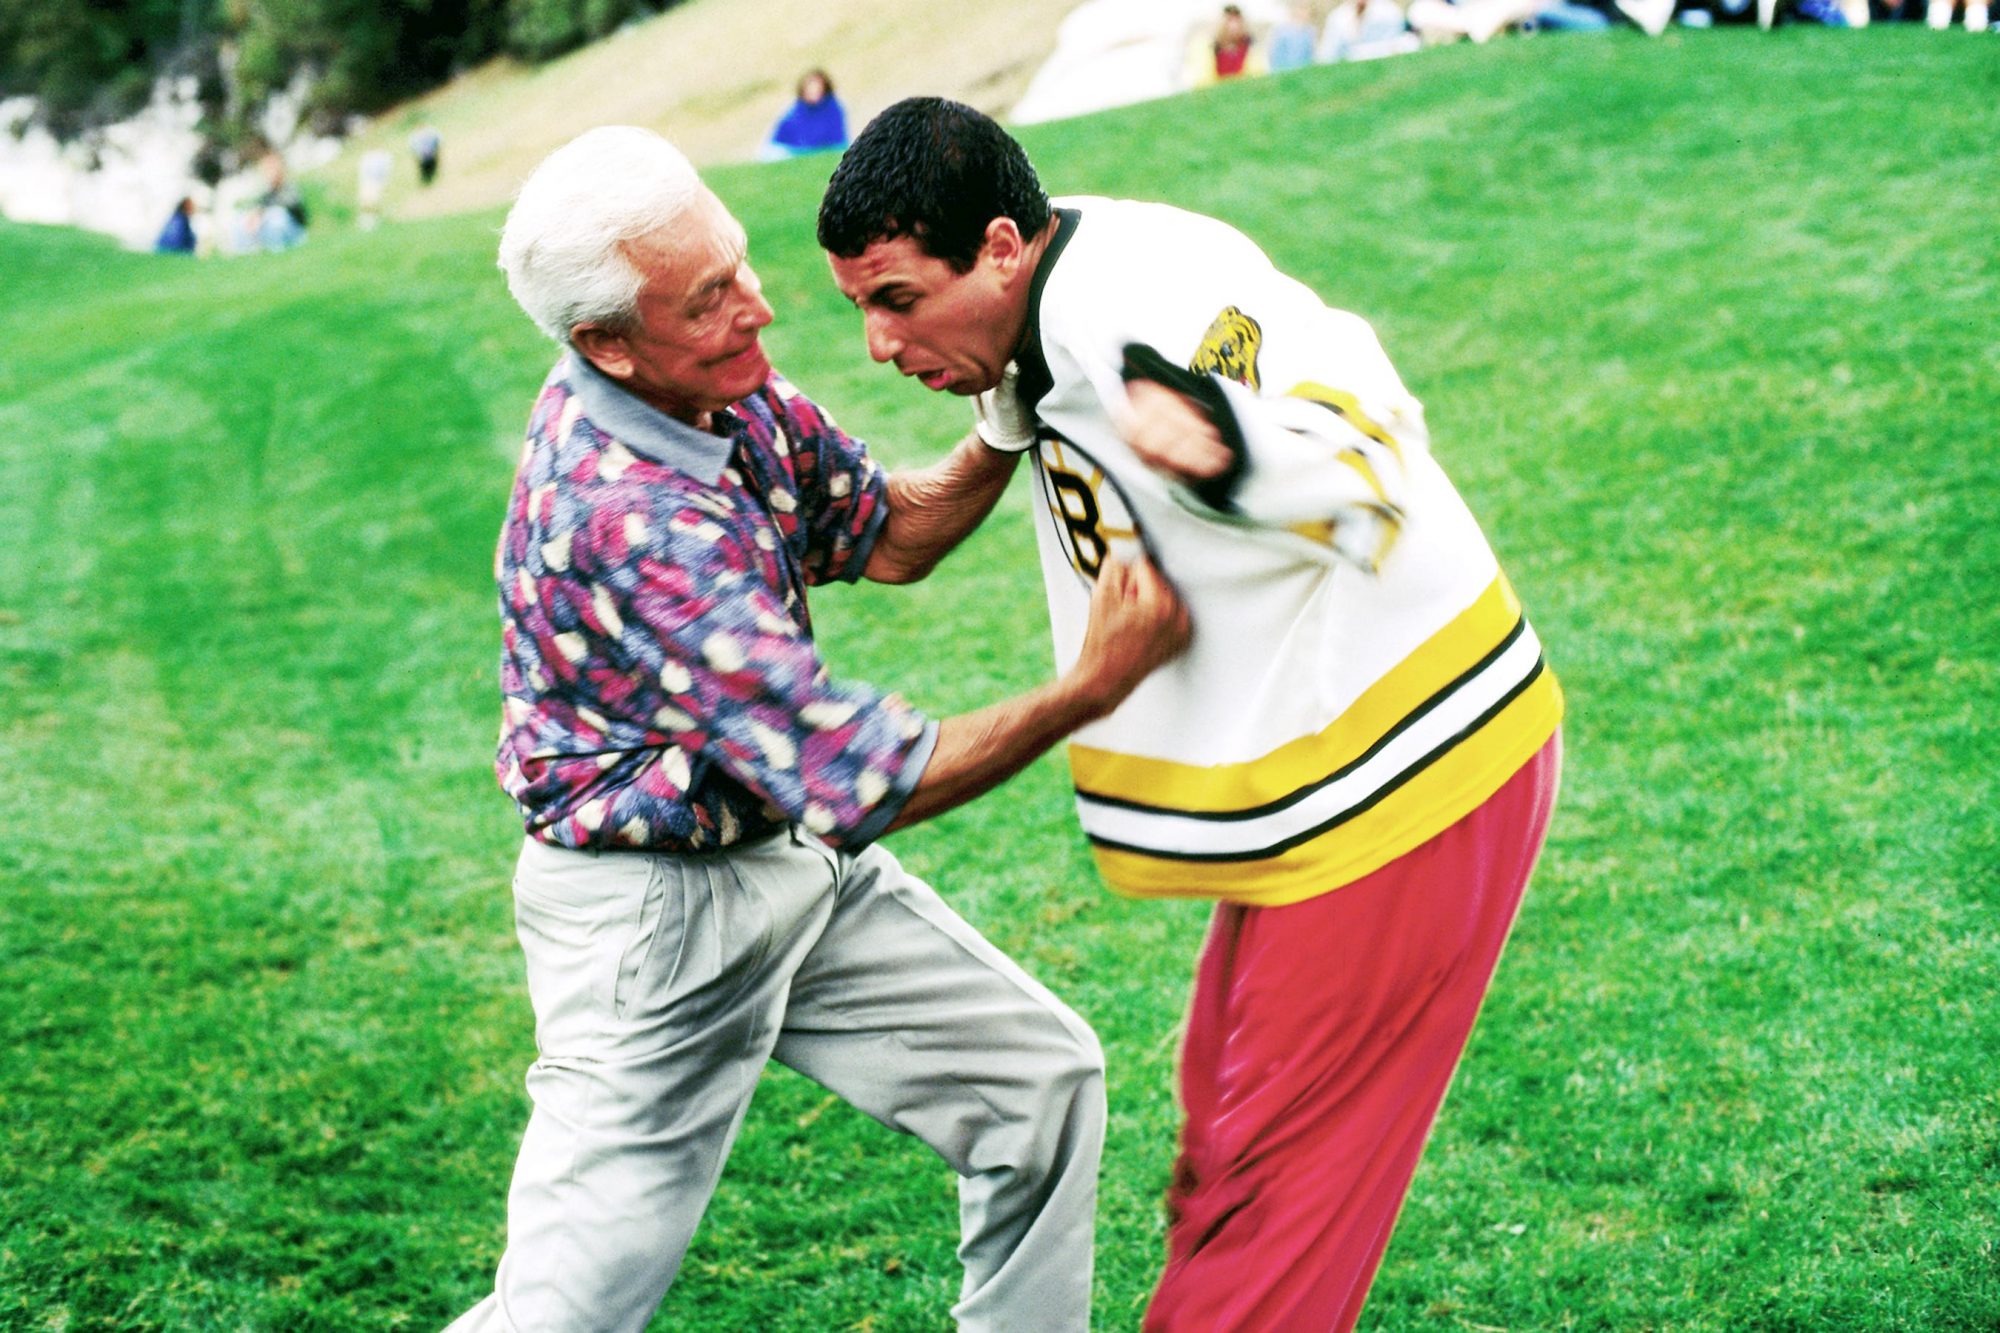 From Caddyshack To Happy Gilmore: The Most Memorable Golf Movie Moments